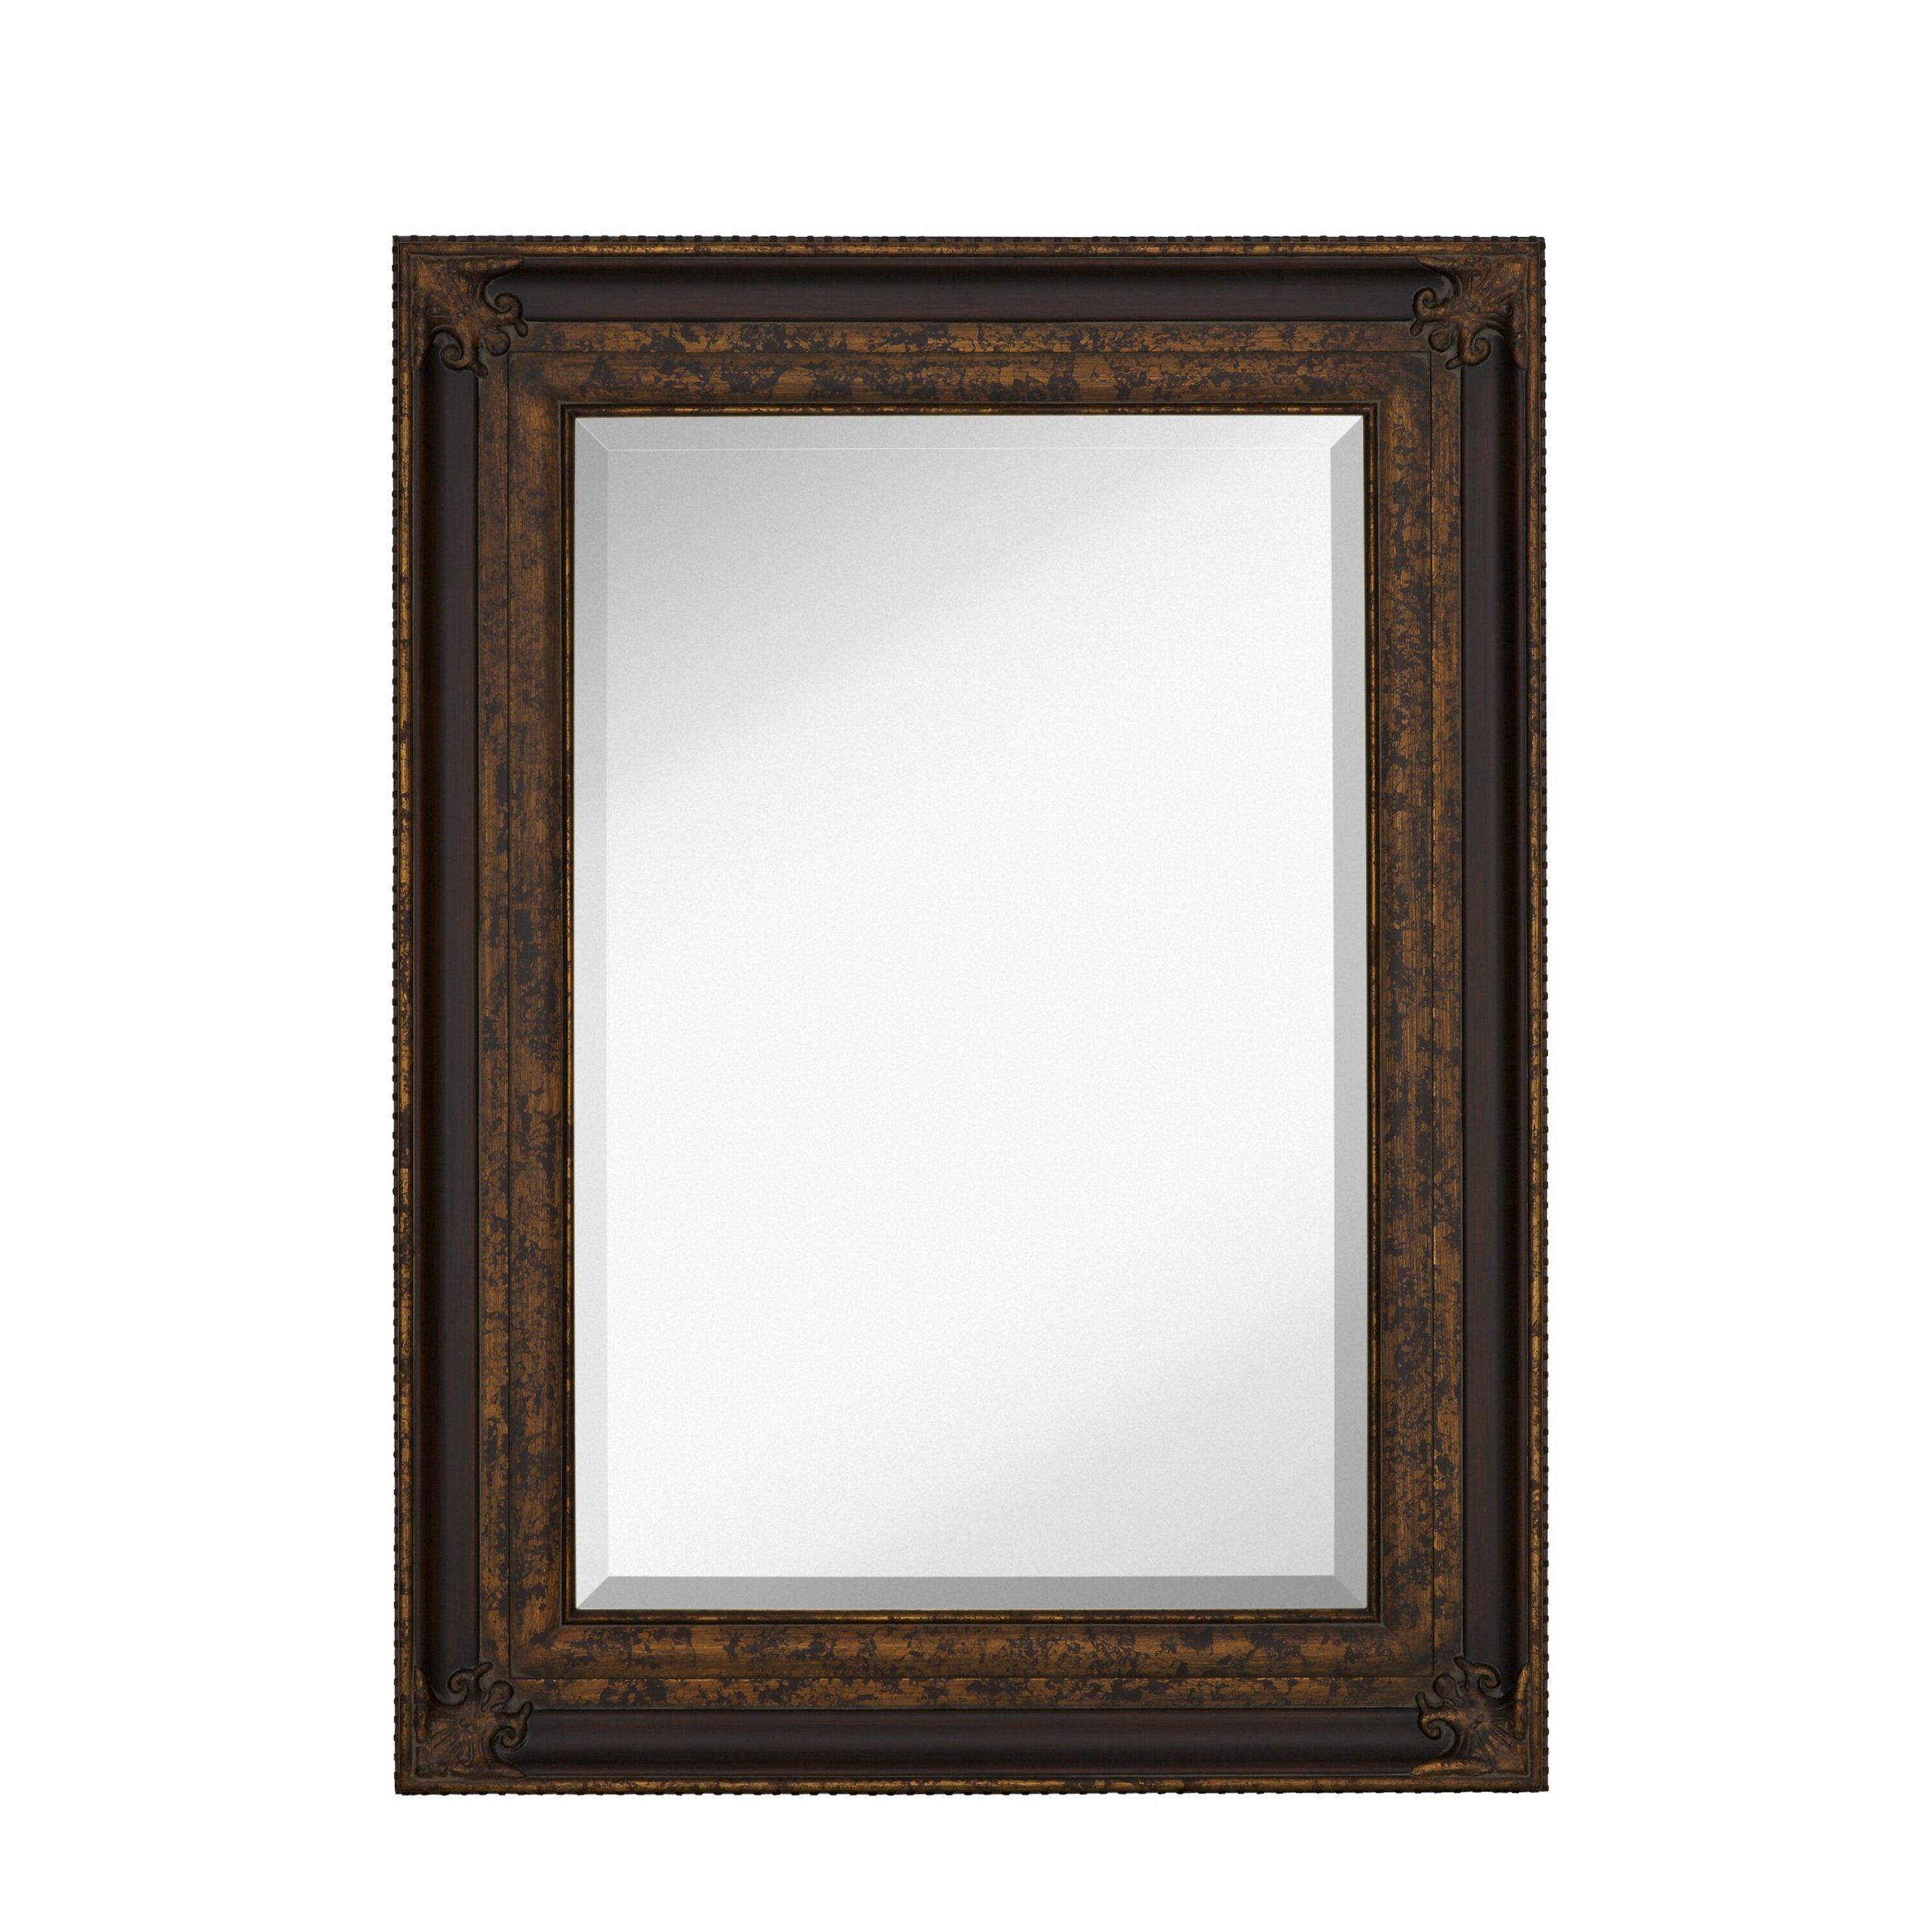 Majestic Mirror Rectangular Antique Gold Leaf With Dark Brown Panel Throughout Warm Gold Rectangular Wall Mirrors (View 11 of 15)